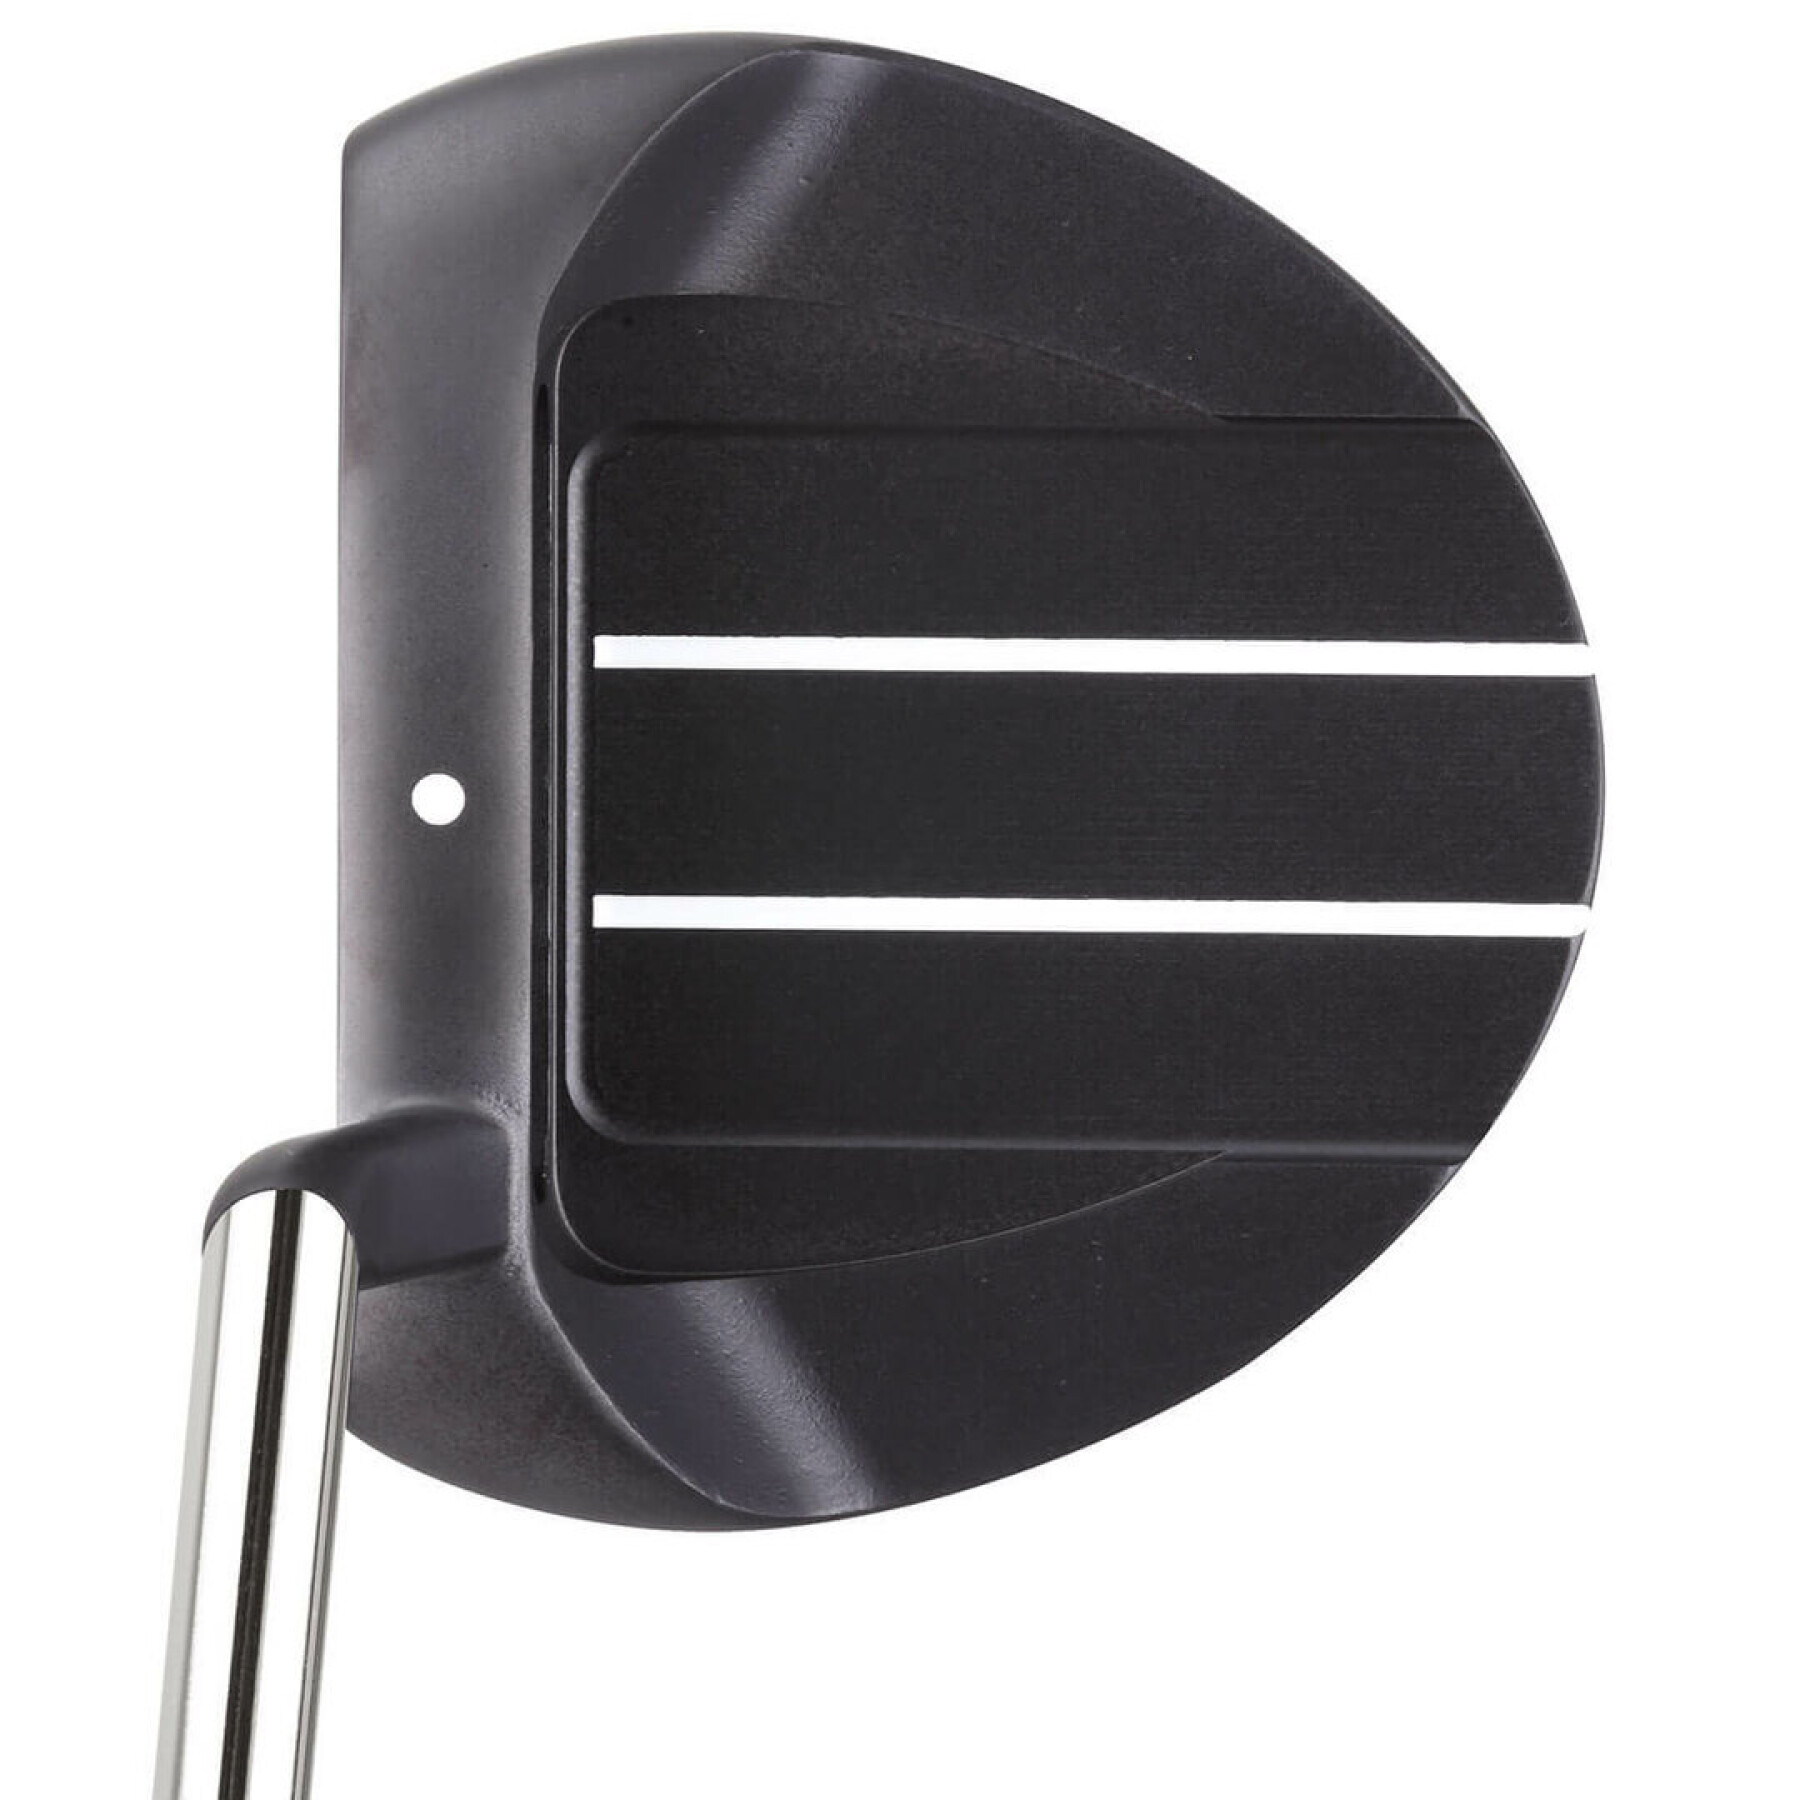 Right-handed putter Benross & Rife Roll Groove 4 35’ inches